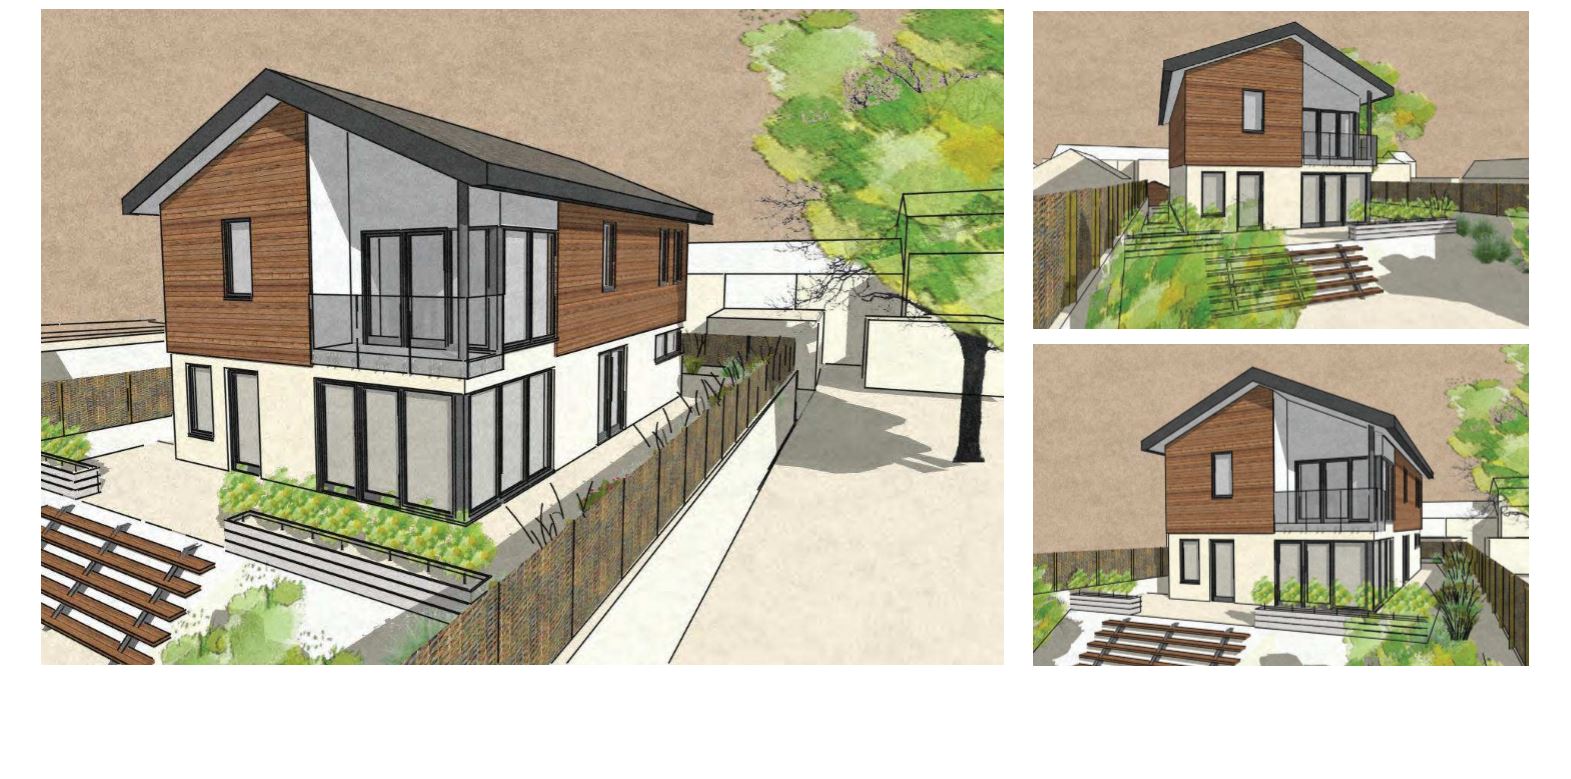 Starcross residential project submitted for Planning – Rud Sawers Architects, Devon